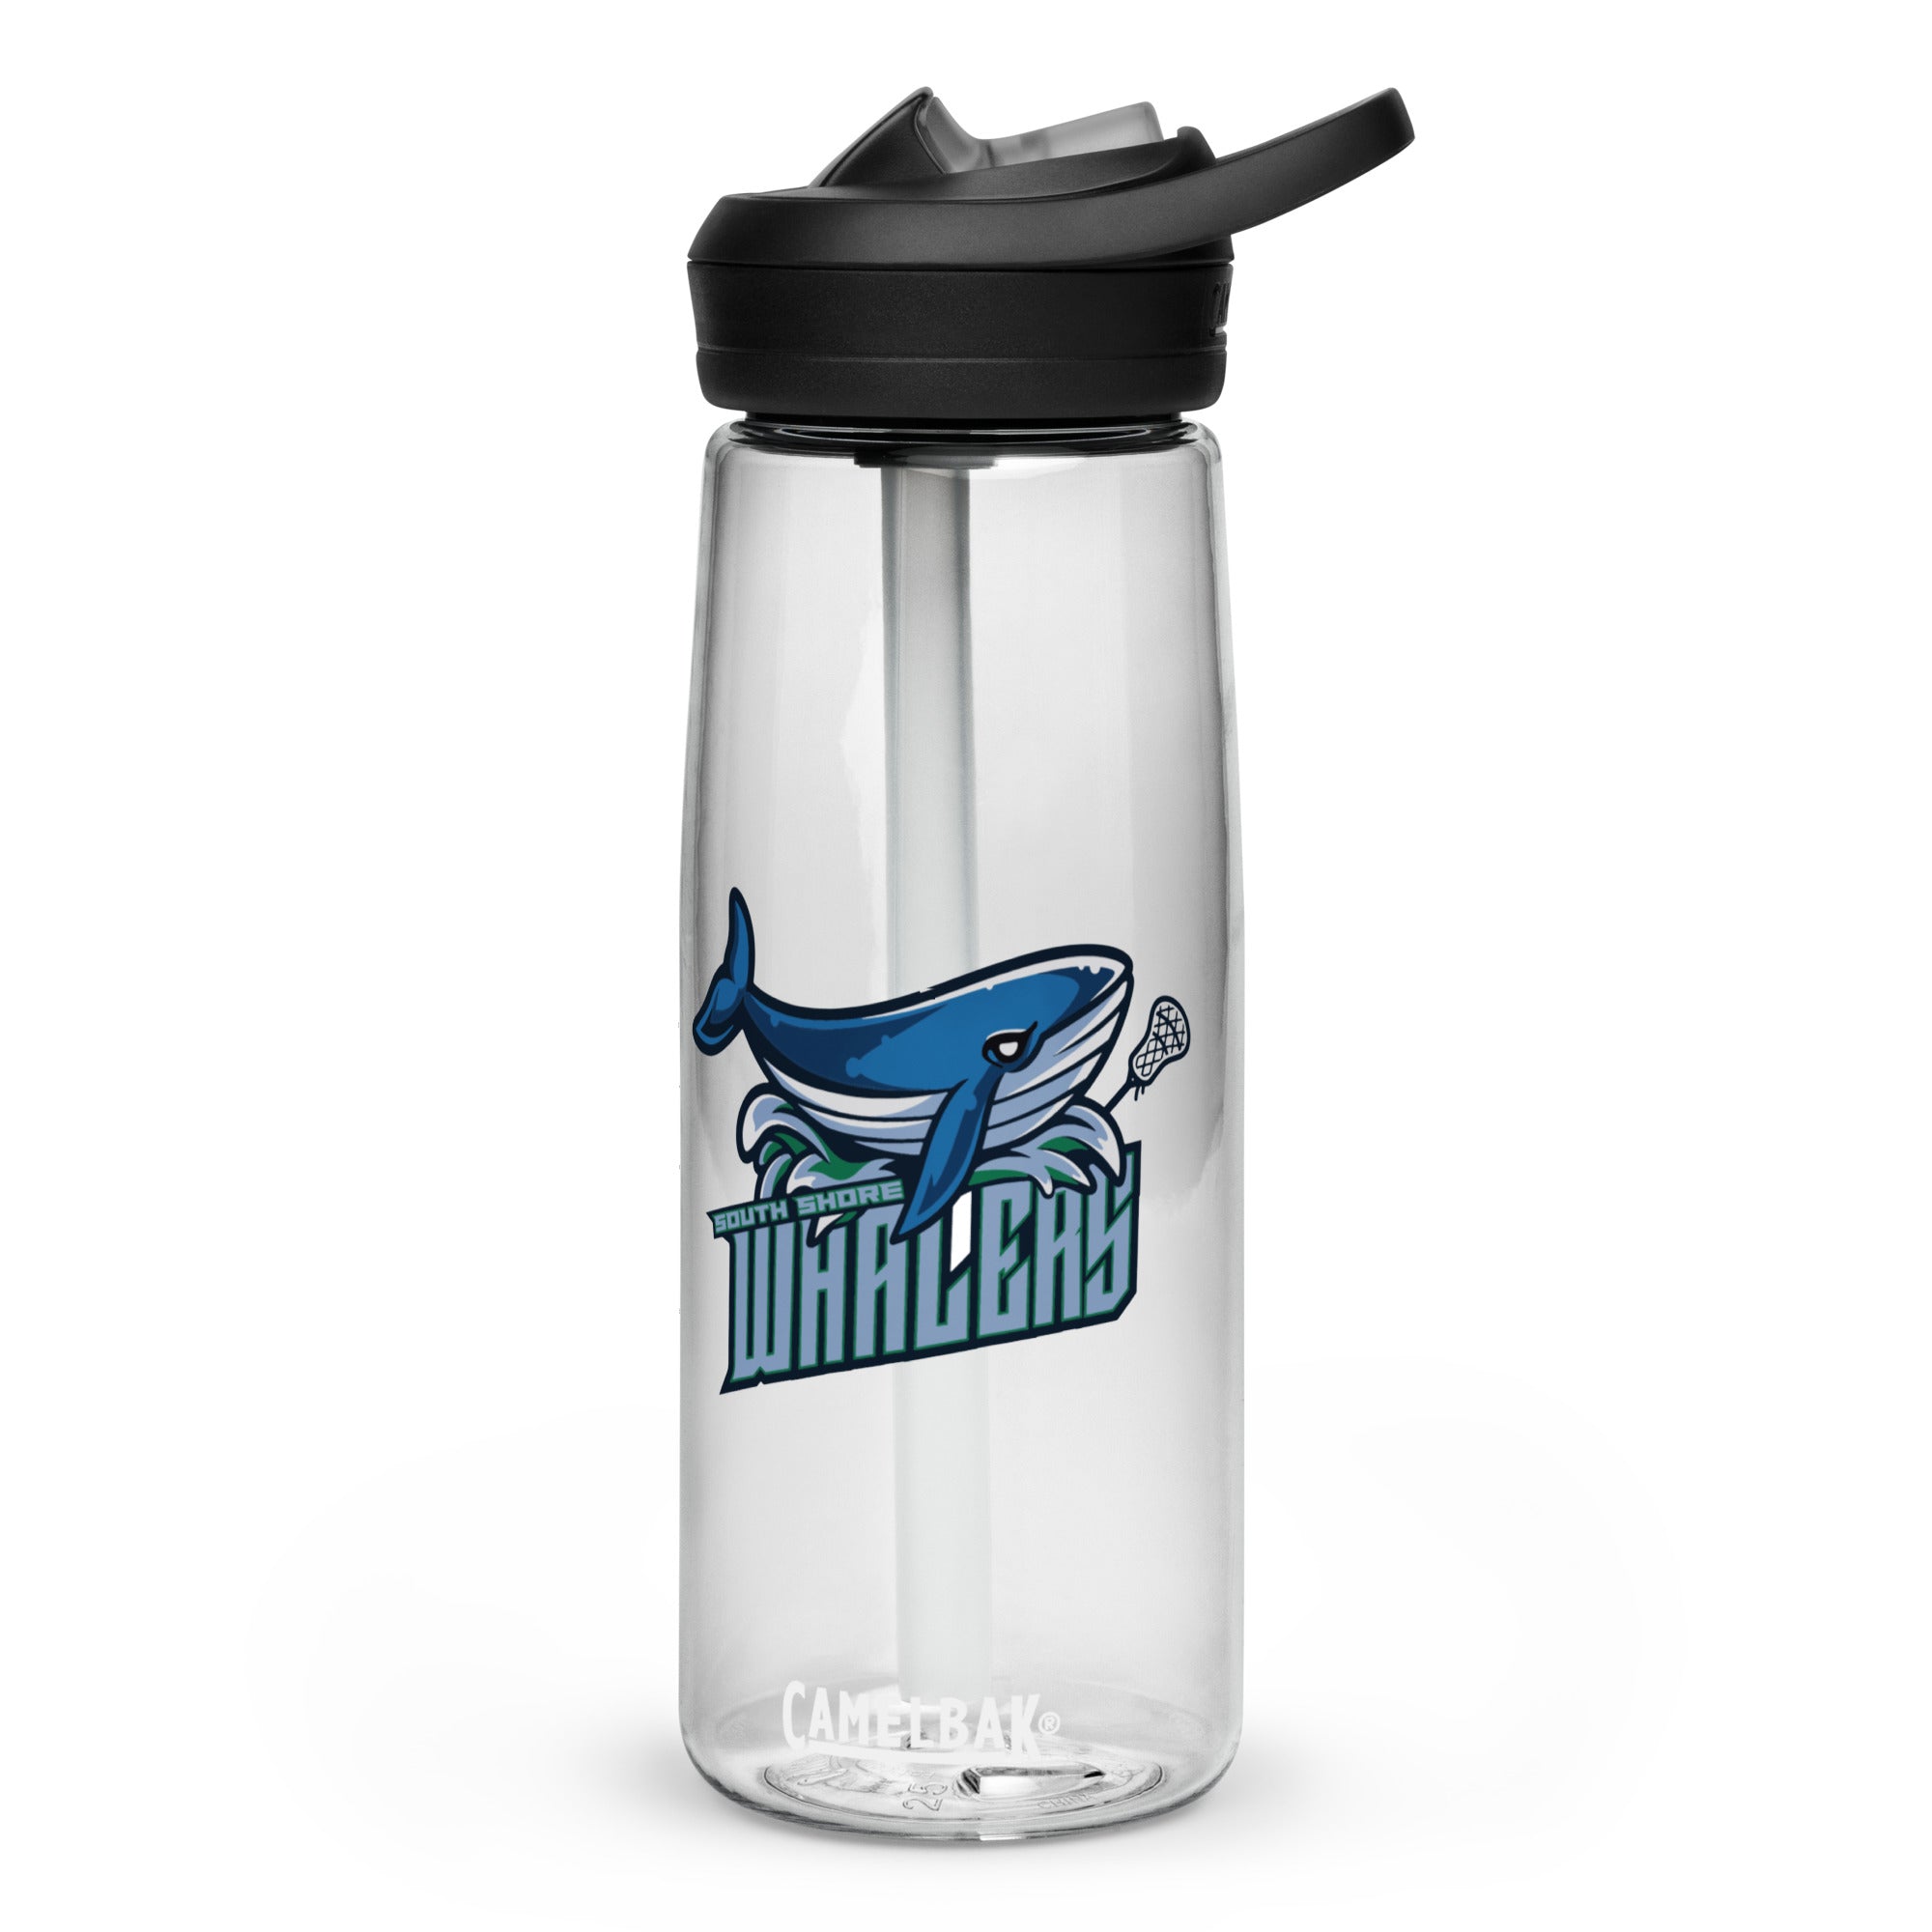 Whalers LC Sports water bottle